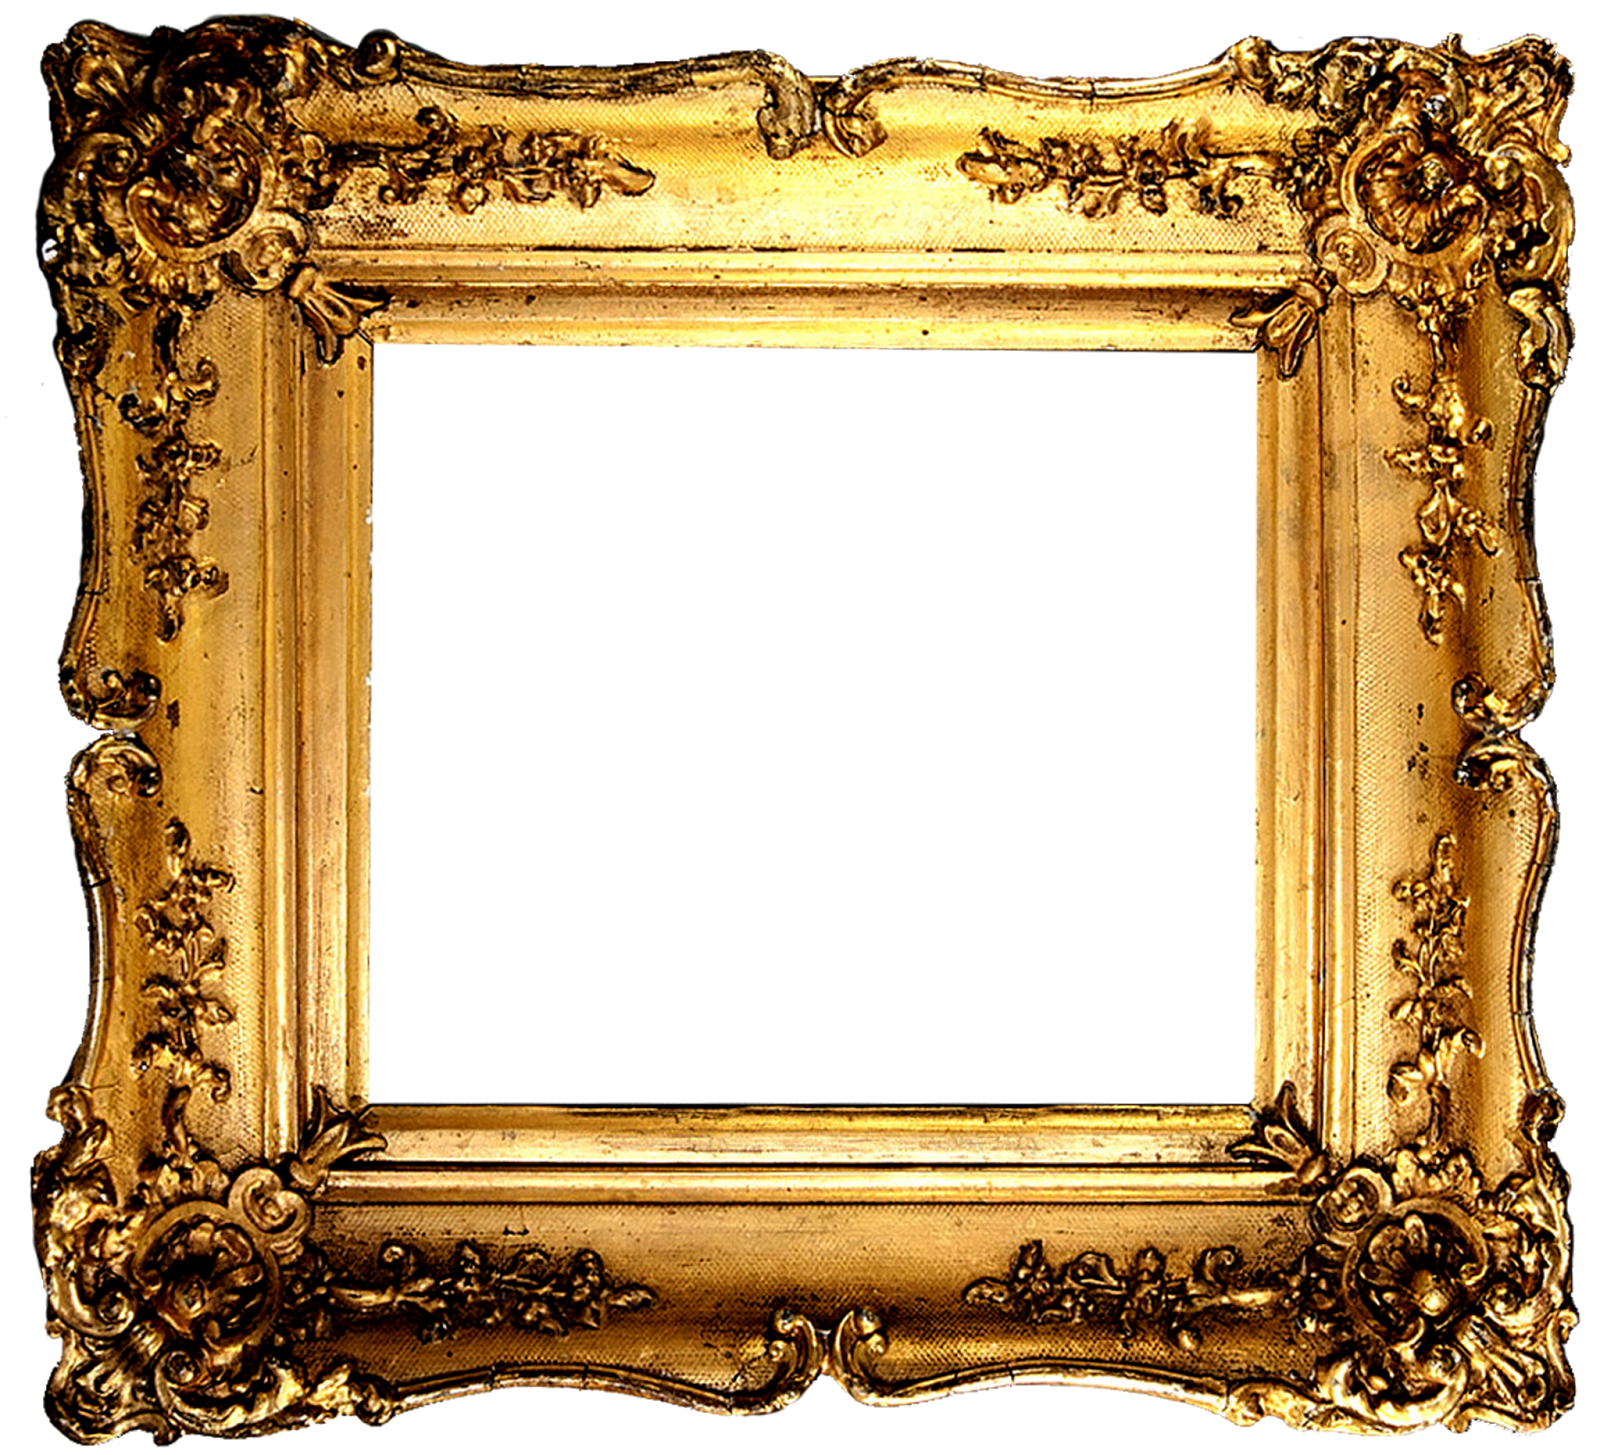 Antique Frame Gold Free Photo PNG Image